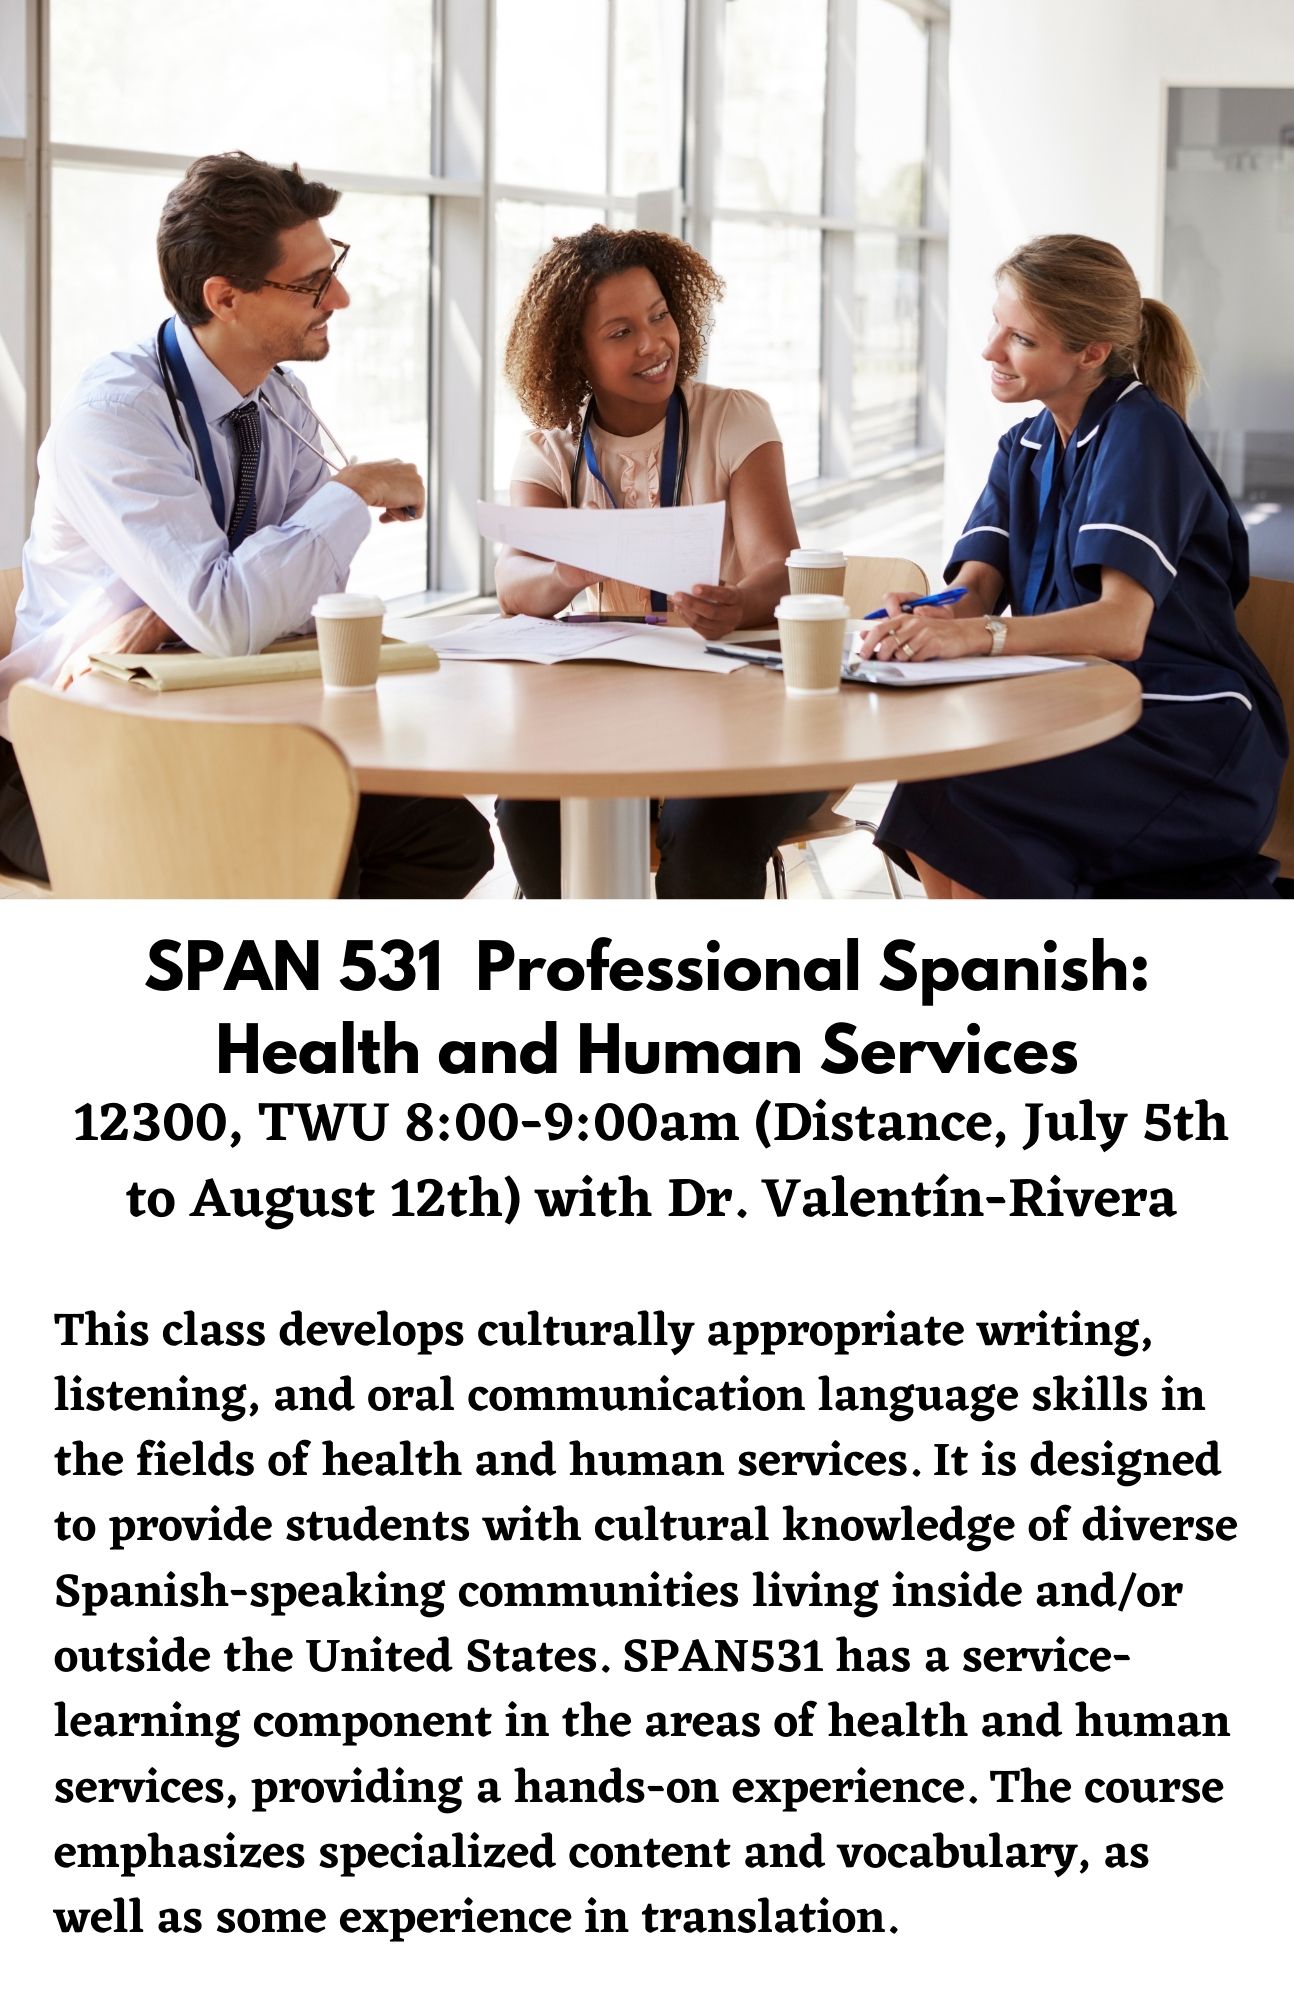 SPAN 531  Professional Spanish: Health and Human Services. 12300, TWU 8:00-9:00am (Distance, July 5th to August 12th) with Dr. Valentín-Rivera. This class develops culturally appropriate writing, listening, and oral communication language skills in the fields of health and human services. It is designed to provide students with cultural knowledge of diverse Spanish-speaking communities living inside and/or outside the United States. SPAN531 has a service-learning component in the areas of health and human services, providing a hands-on experience. The course emphasizes specialized content and vocabulary, as well as some experience in translation.